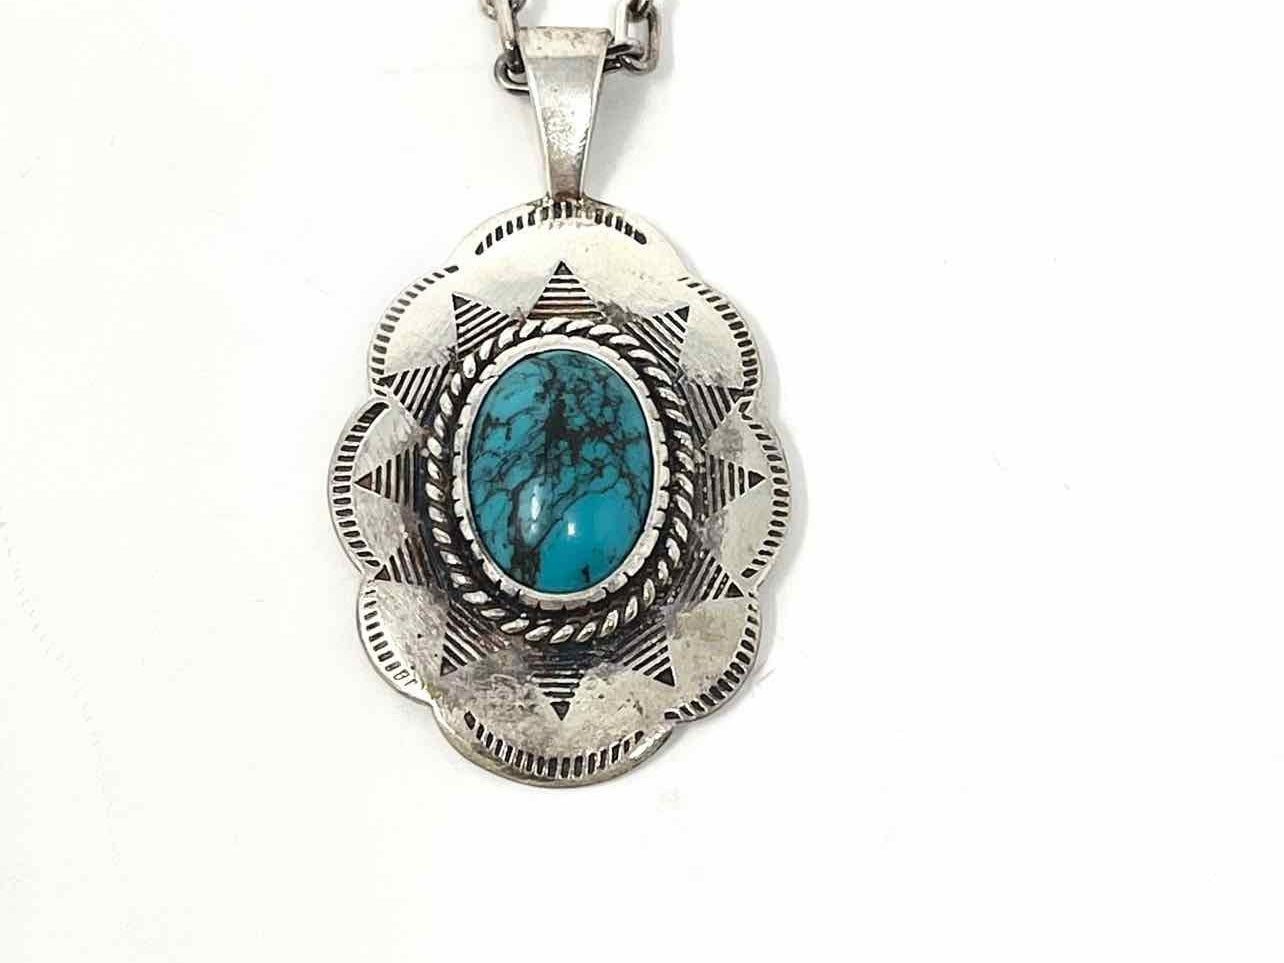 WMC .925 Silver/Turq Oval Turquoise Necklace - Article Consignment